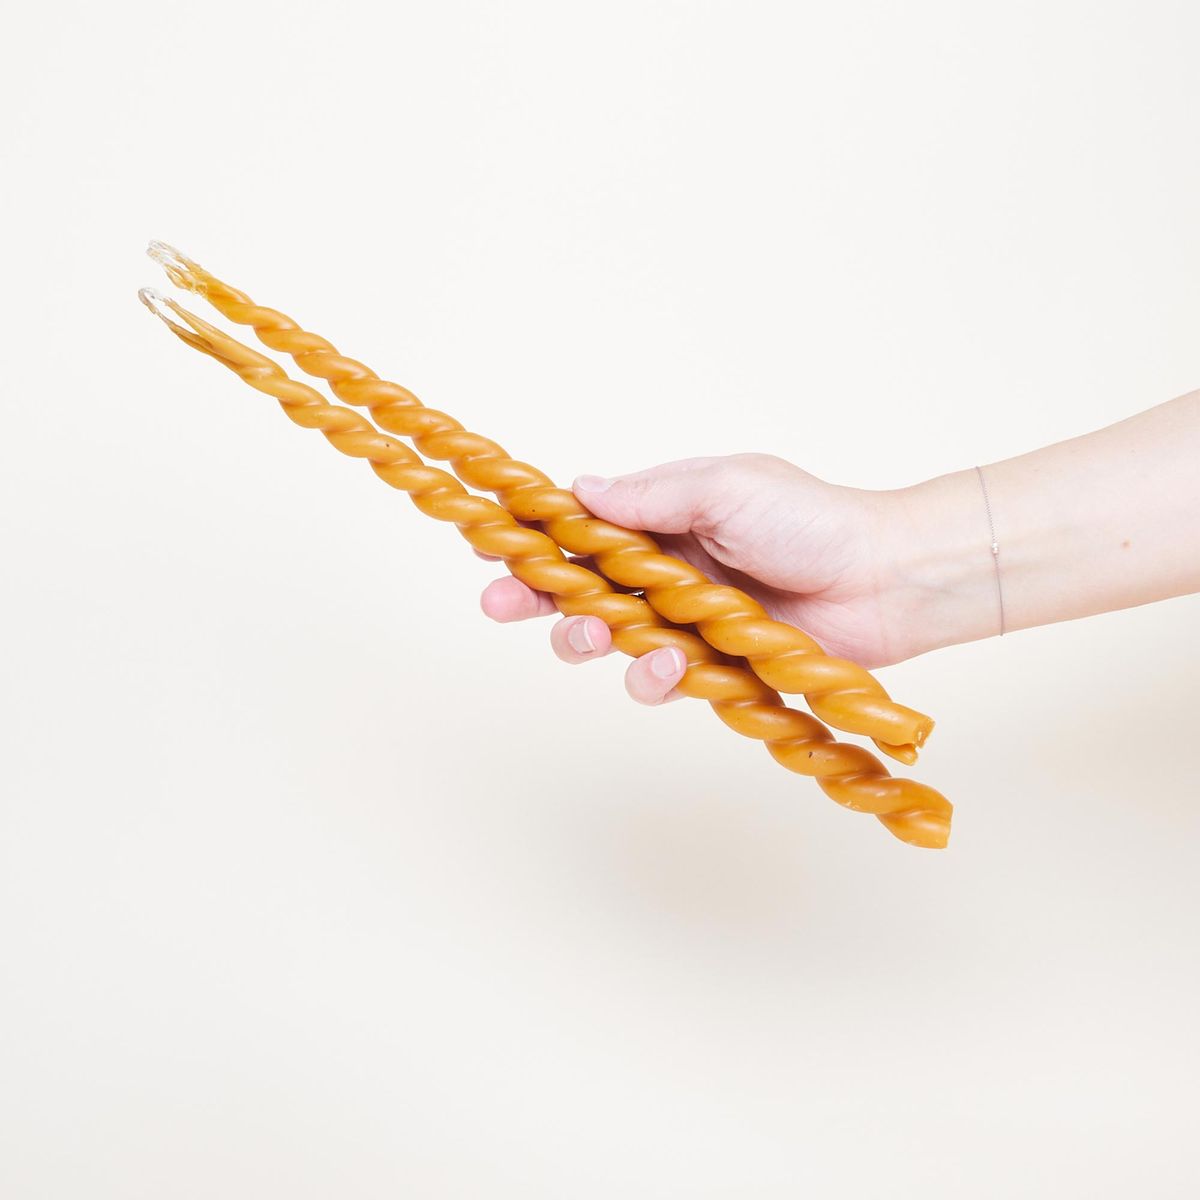 Two twisted yellow long candles held in a hand